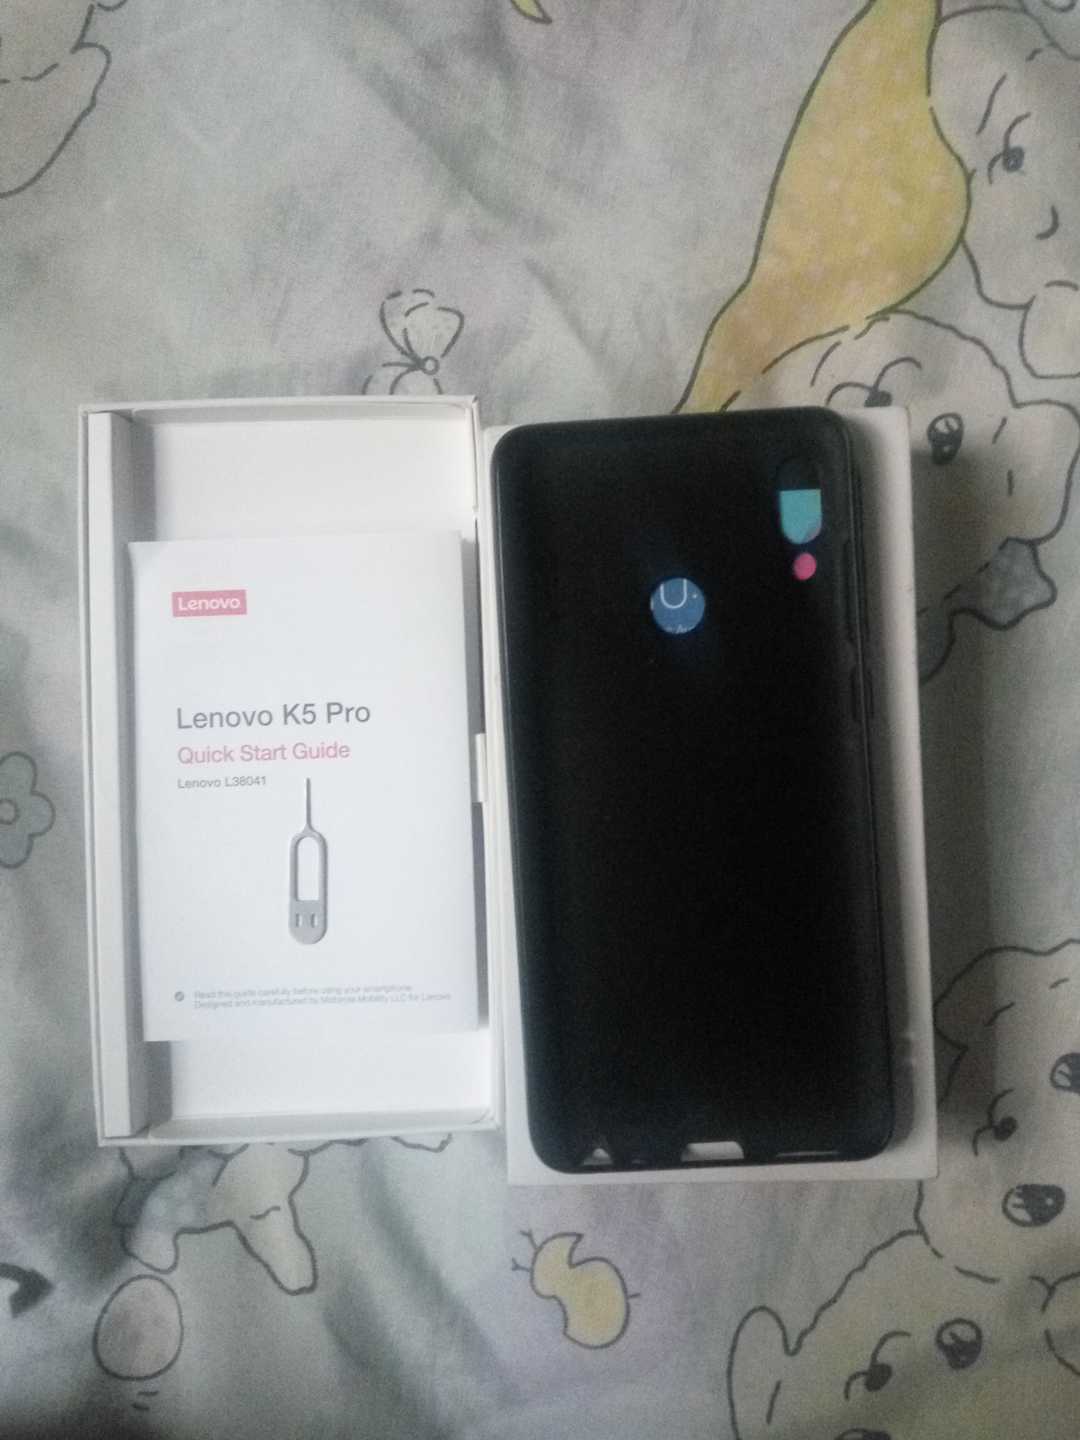 Sold Neatly Used Lenovo K5 Pro For Sale In Lagos Technology Market Nigeria